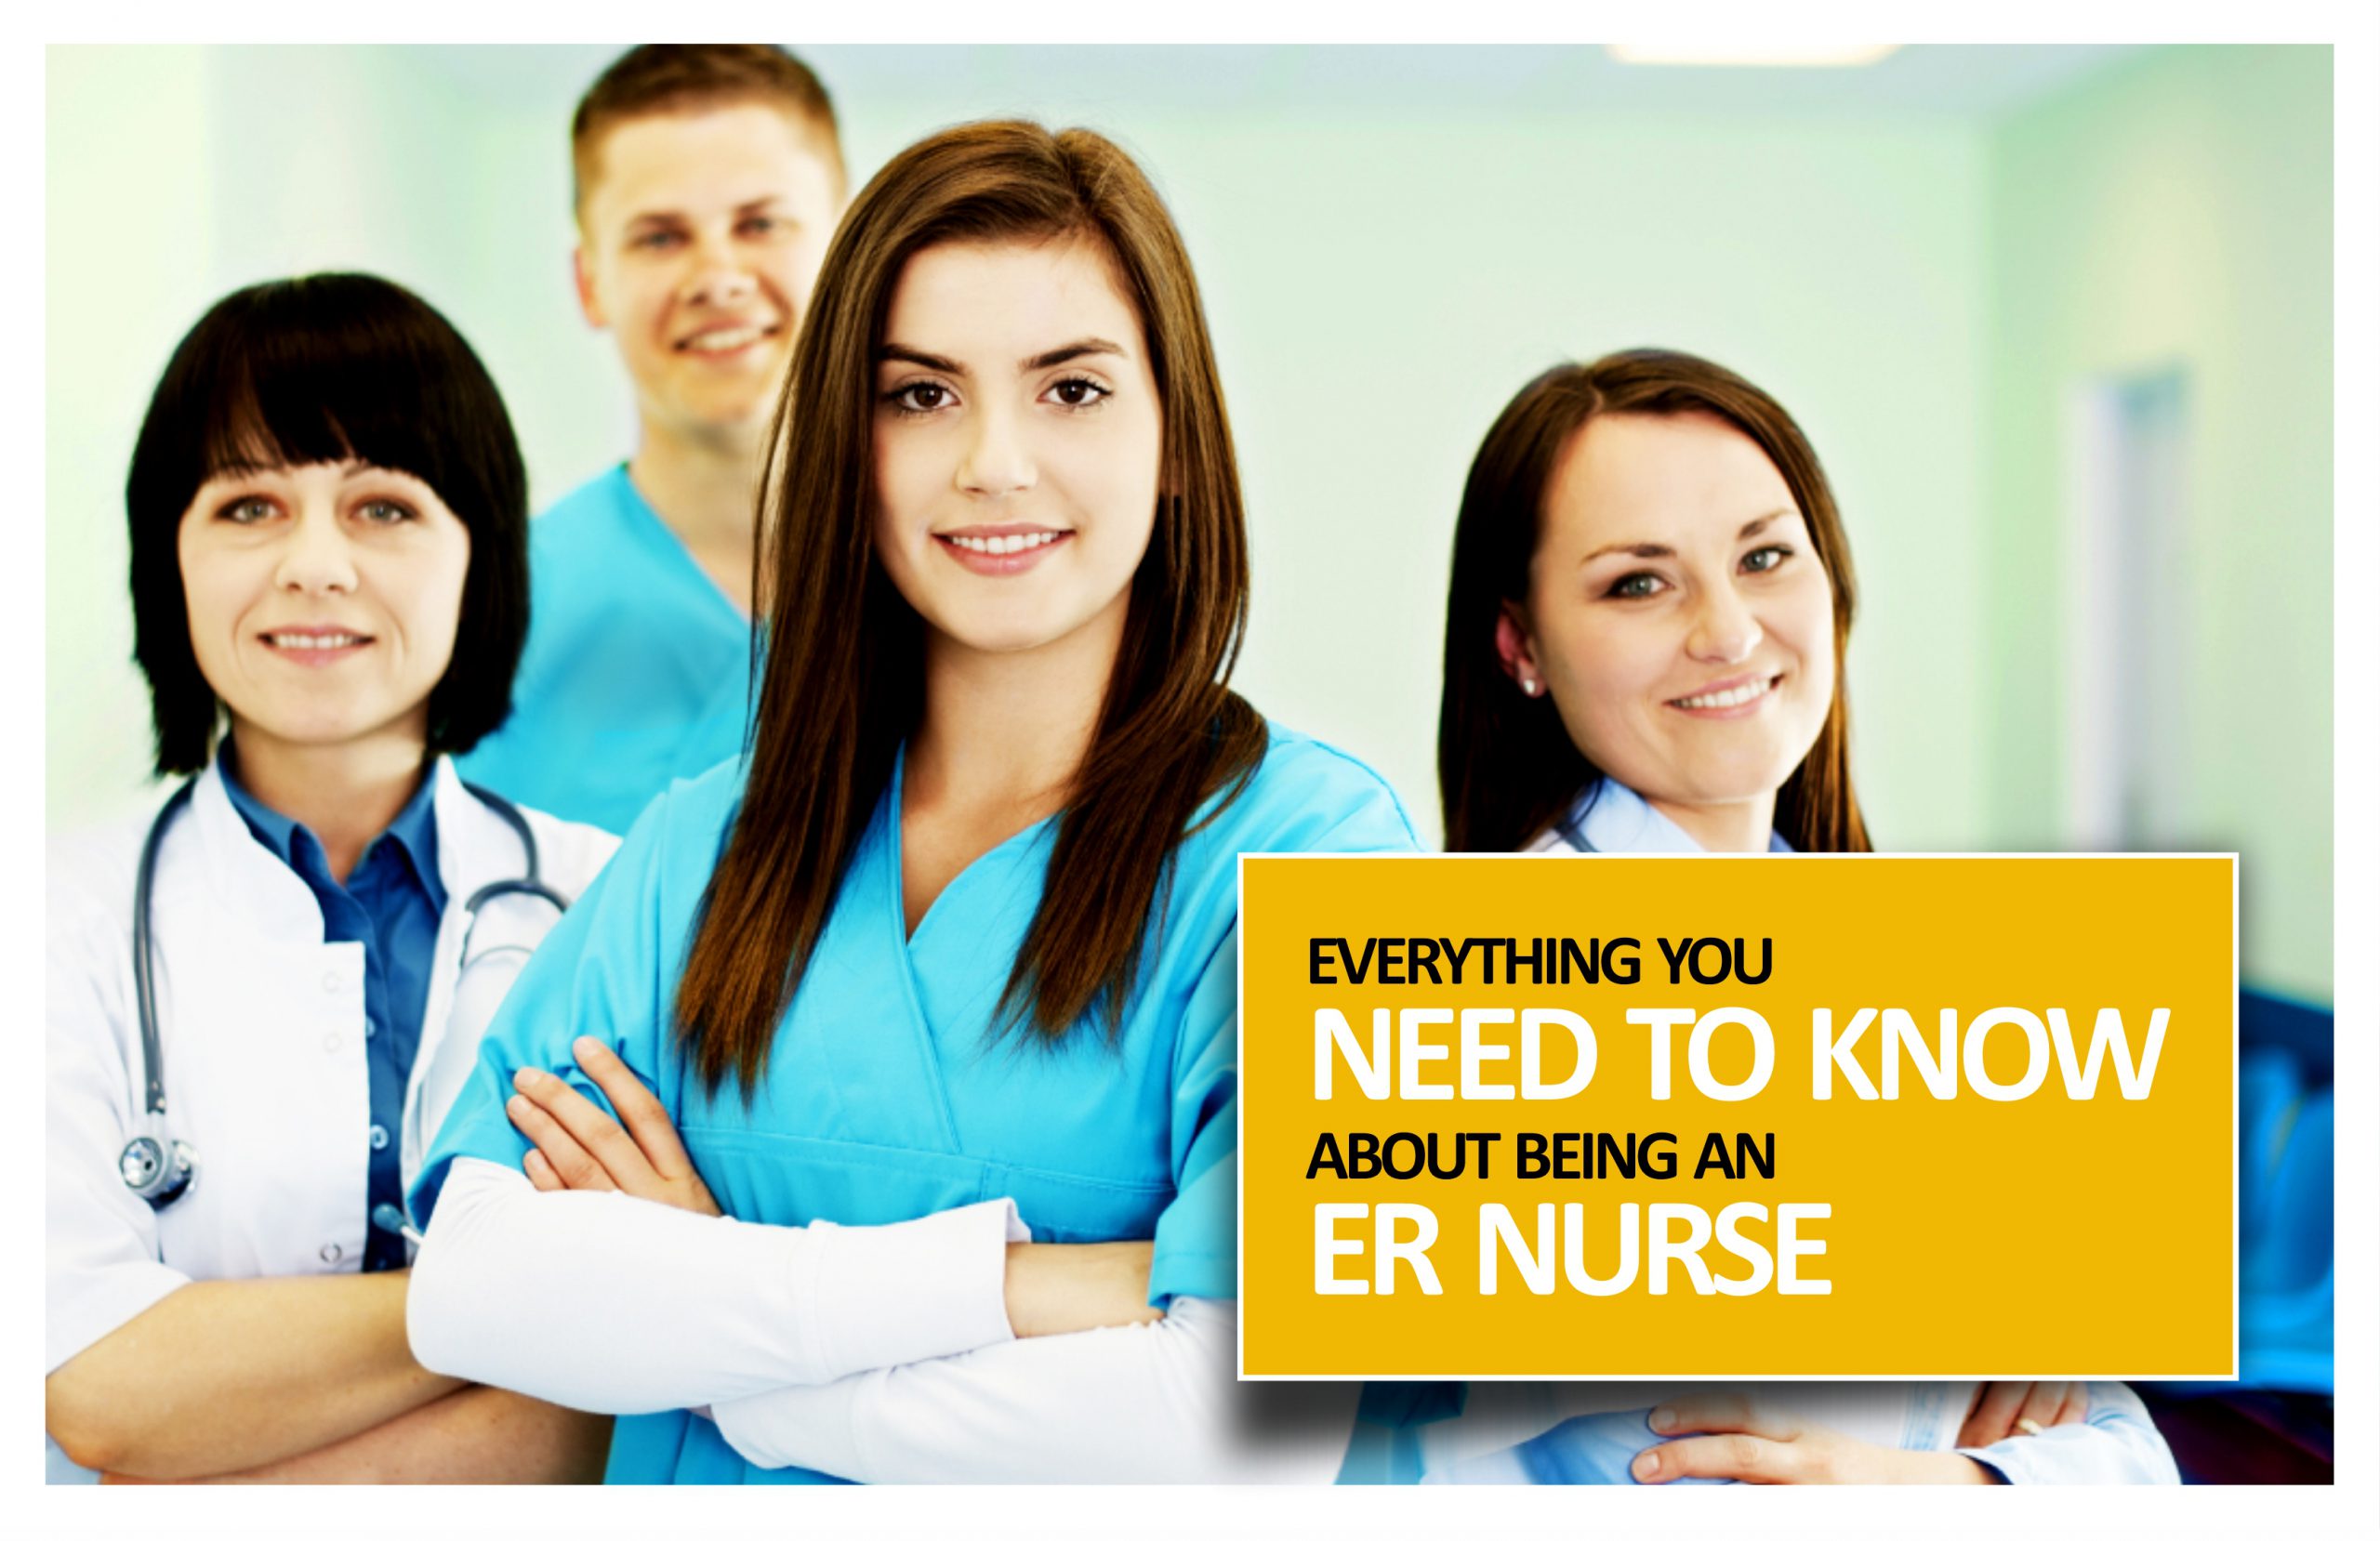 EVERYTHING YOU NEED TO KNOW ABOUT BEING AN ER NURSE